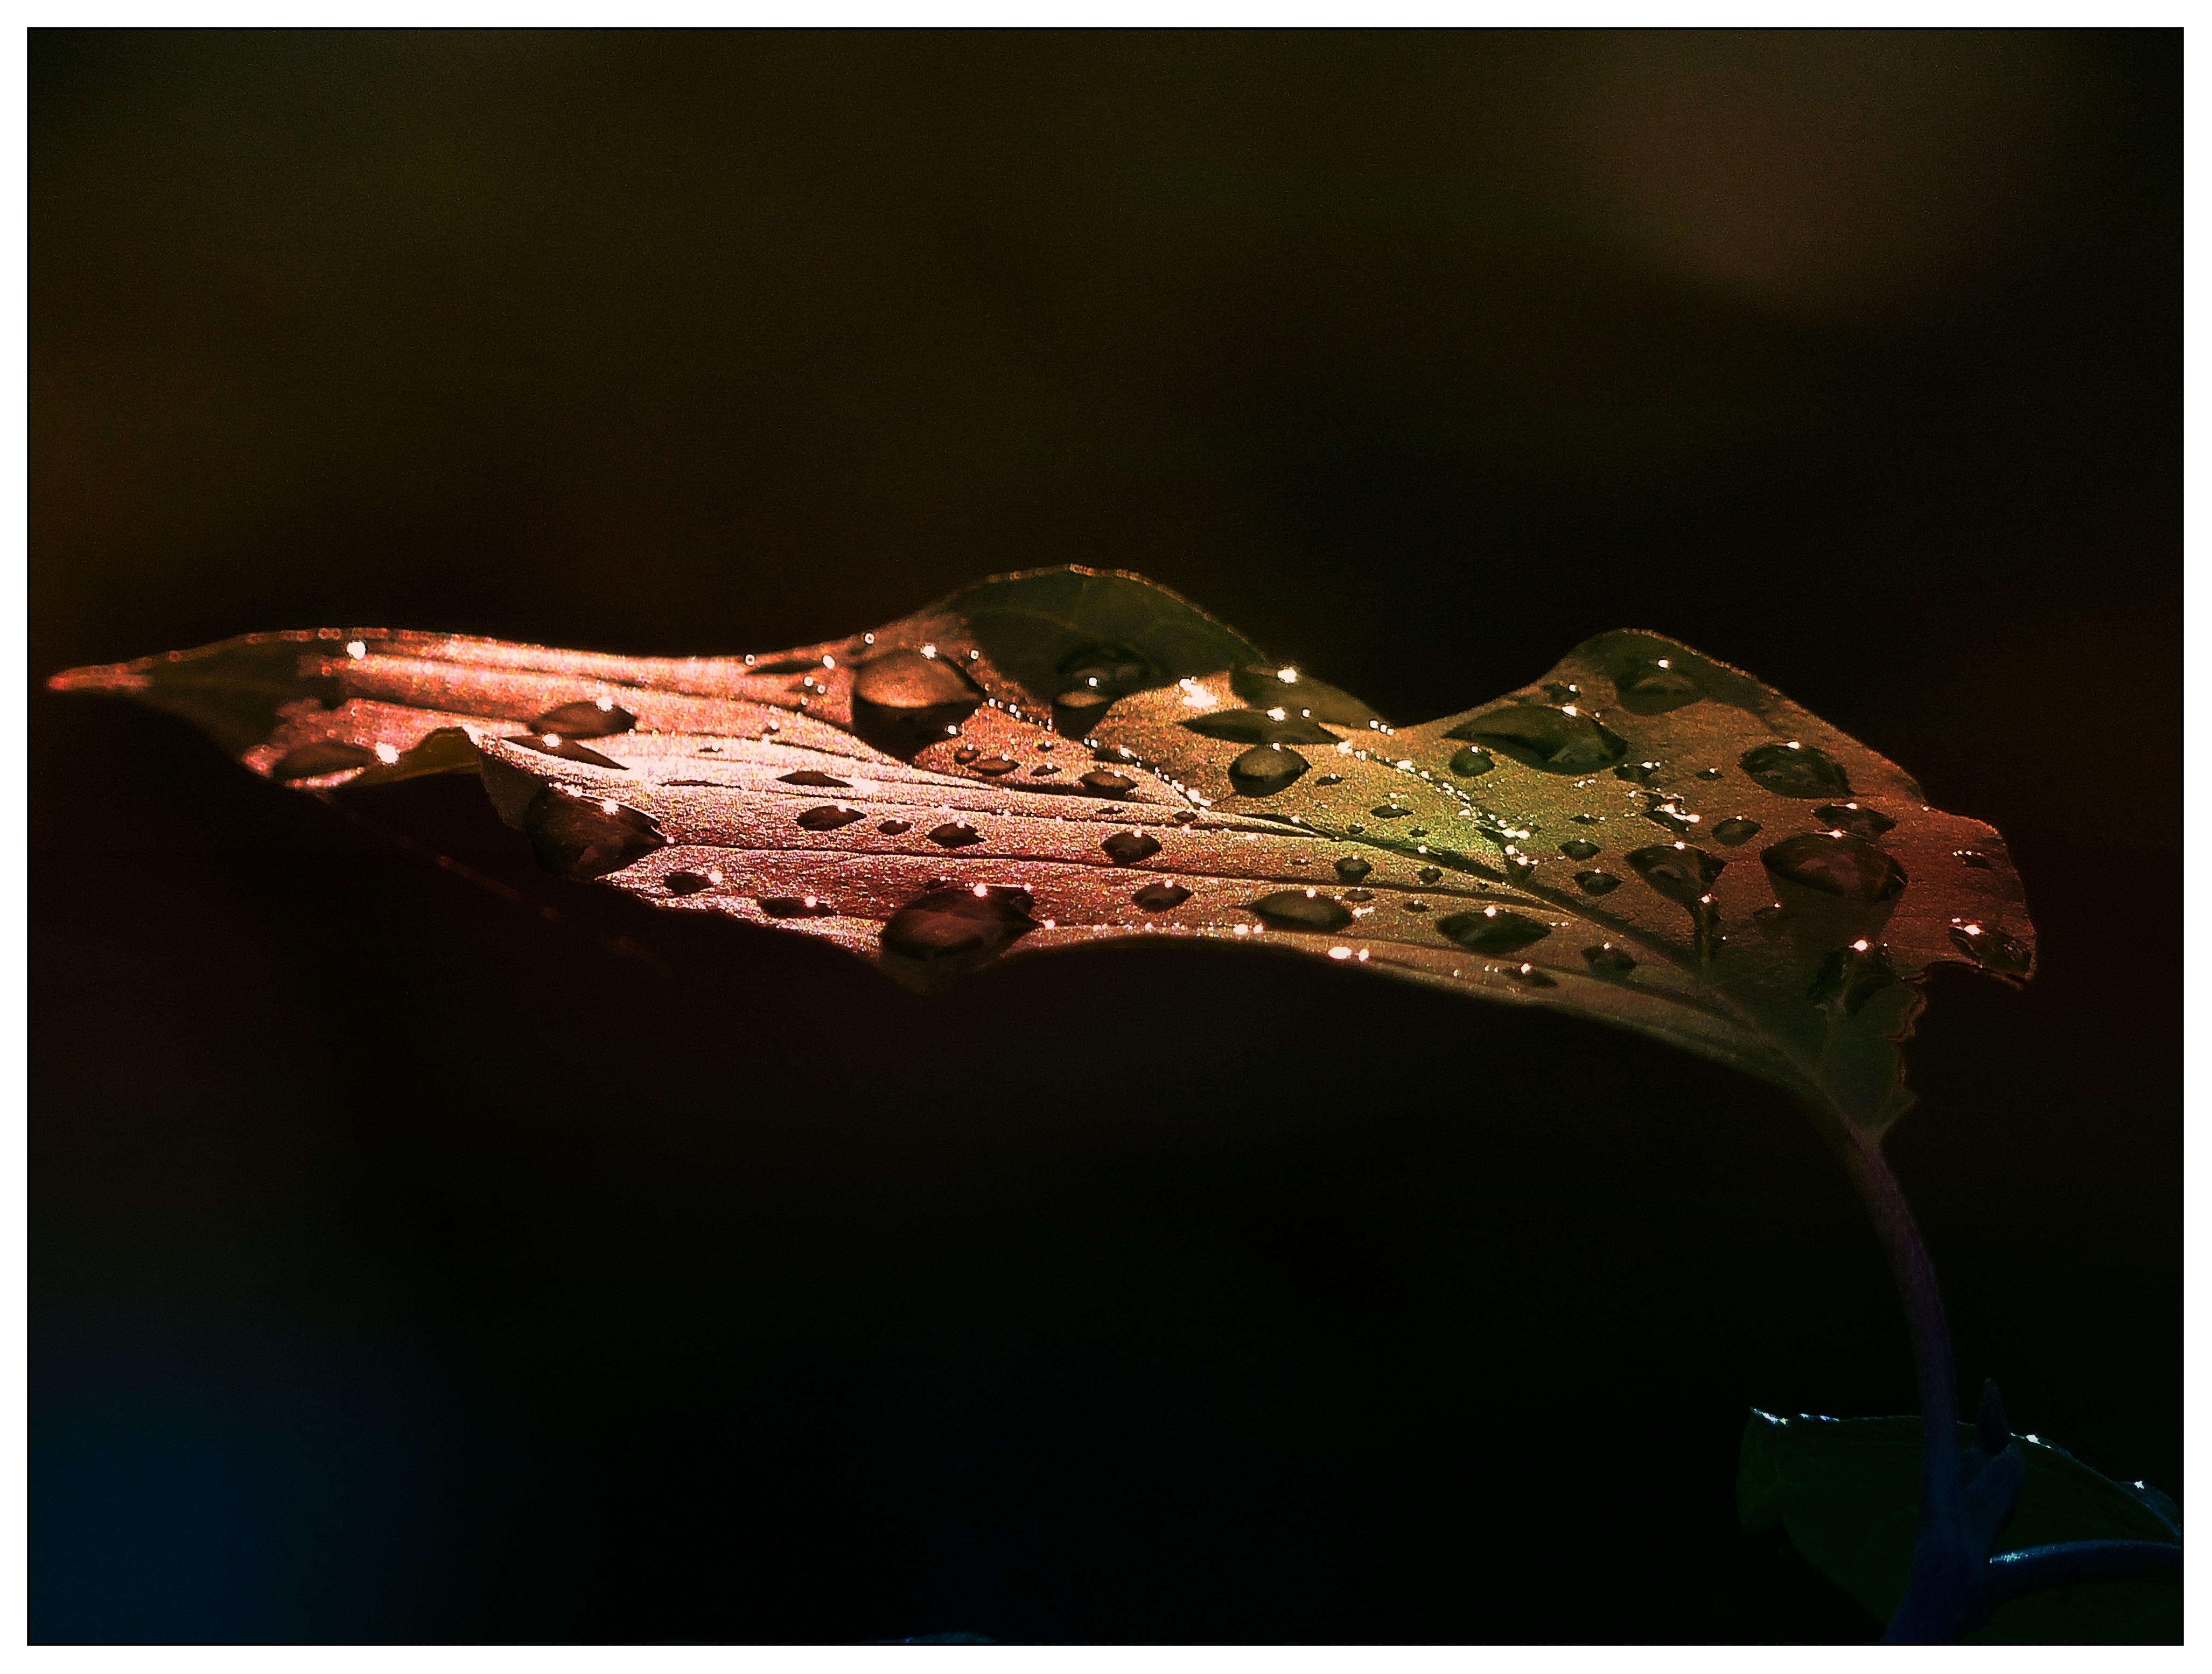 water droplets on brown leaf during nighttime